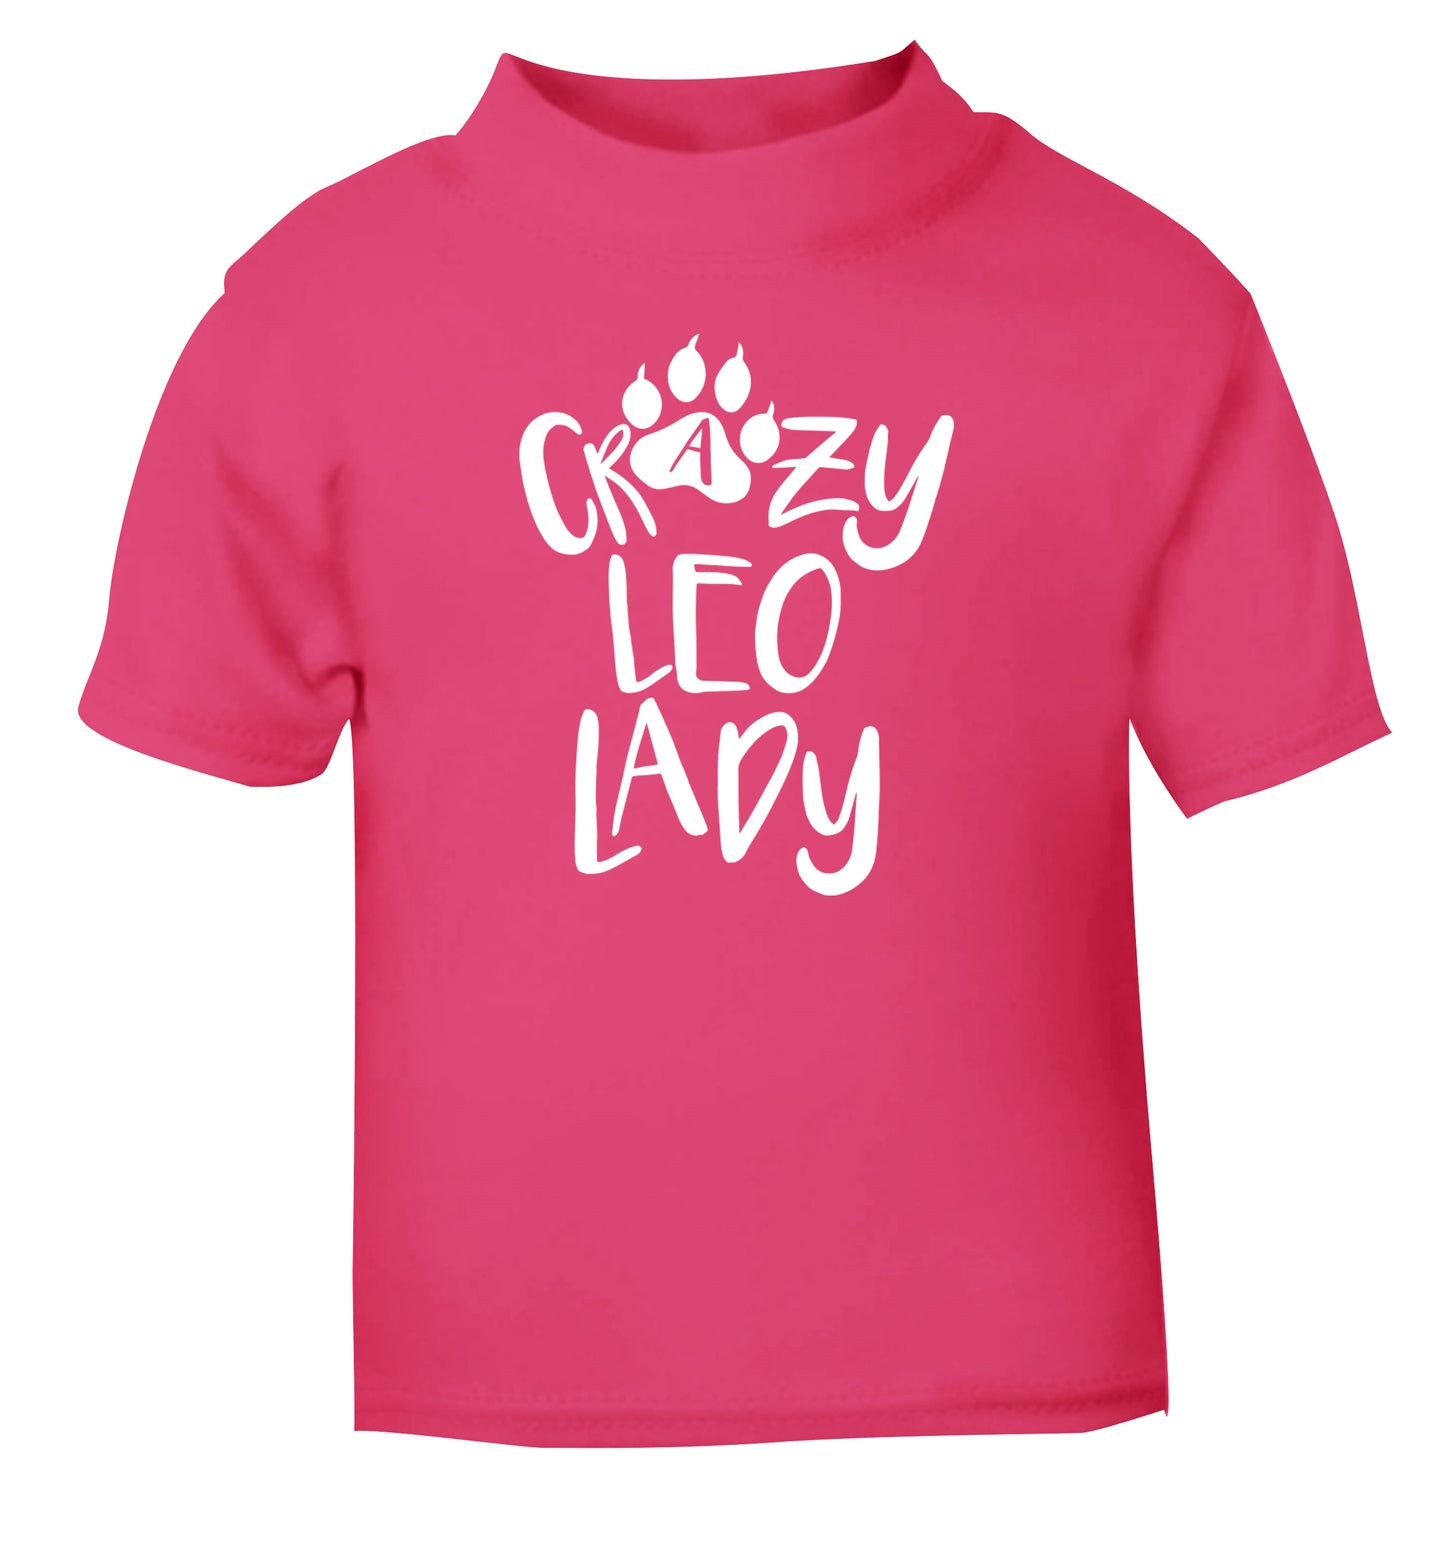 Crazy leo lady pink Baby Toddler Tshirt 2 Years